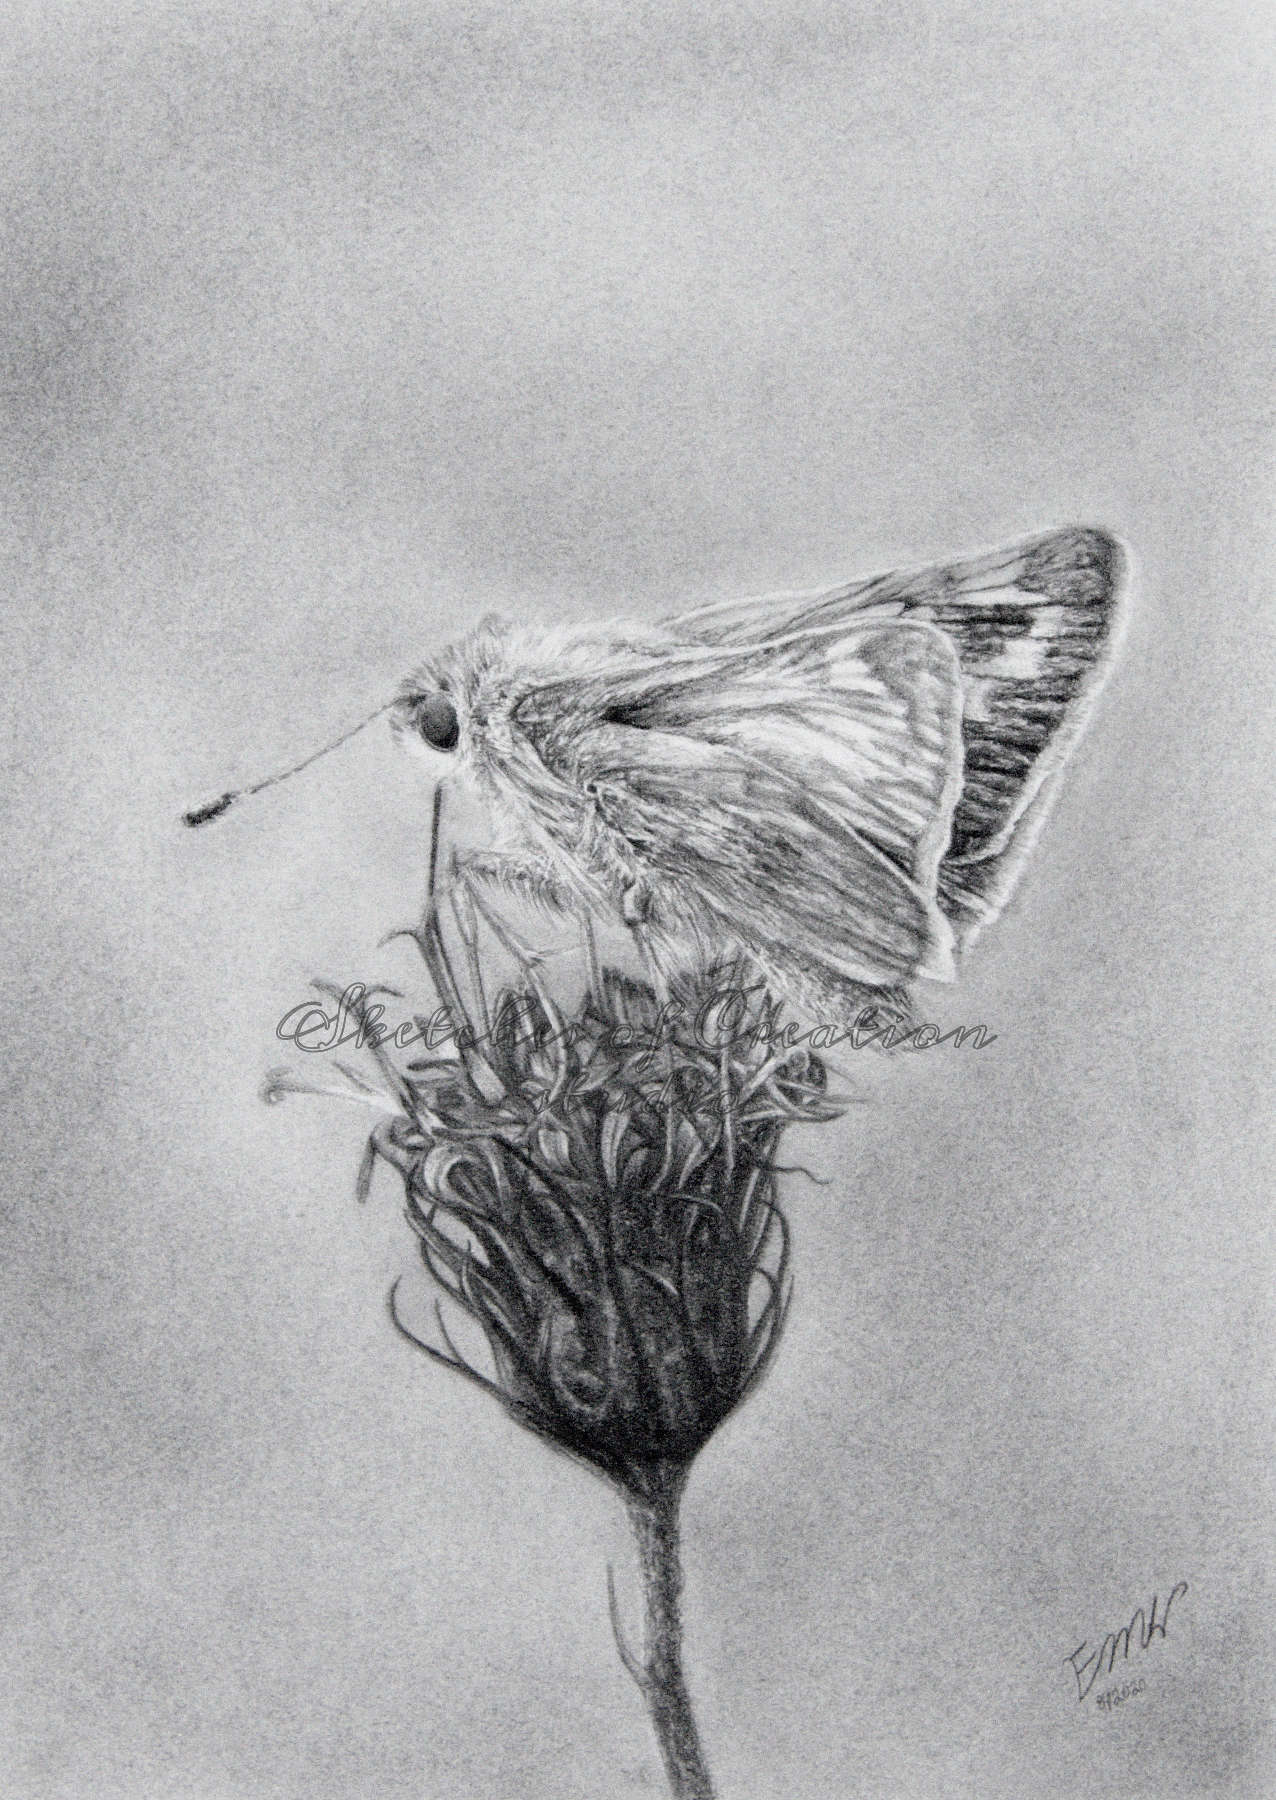 'Skipper' a drawing of a skipper butterfly on New York Ironweed. 5x7 inches. Completed August 2020